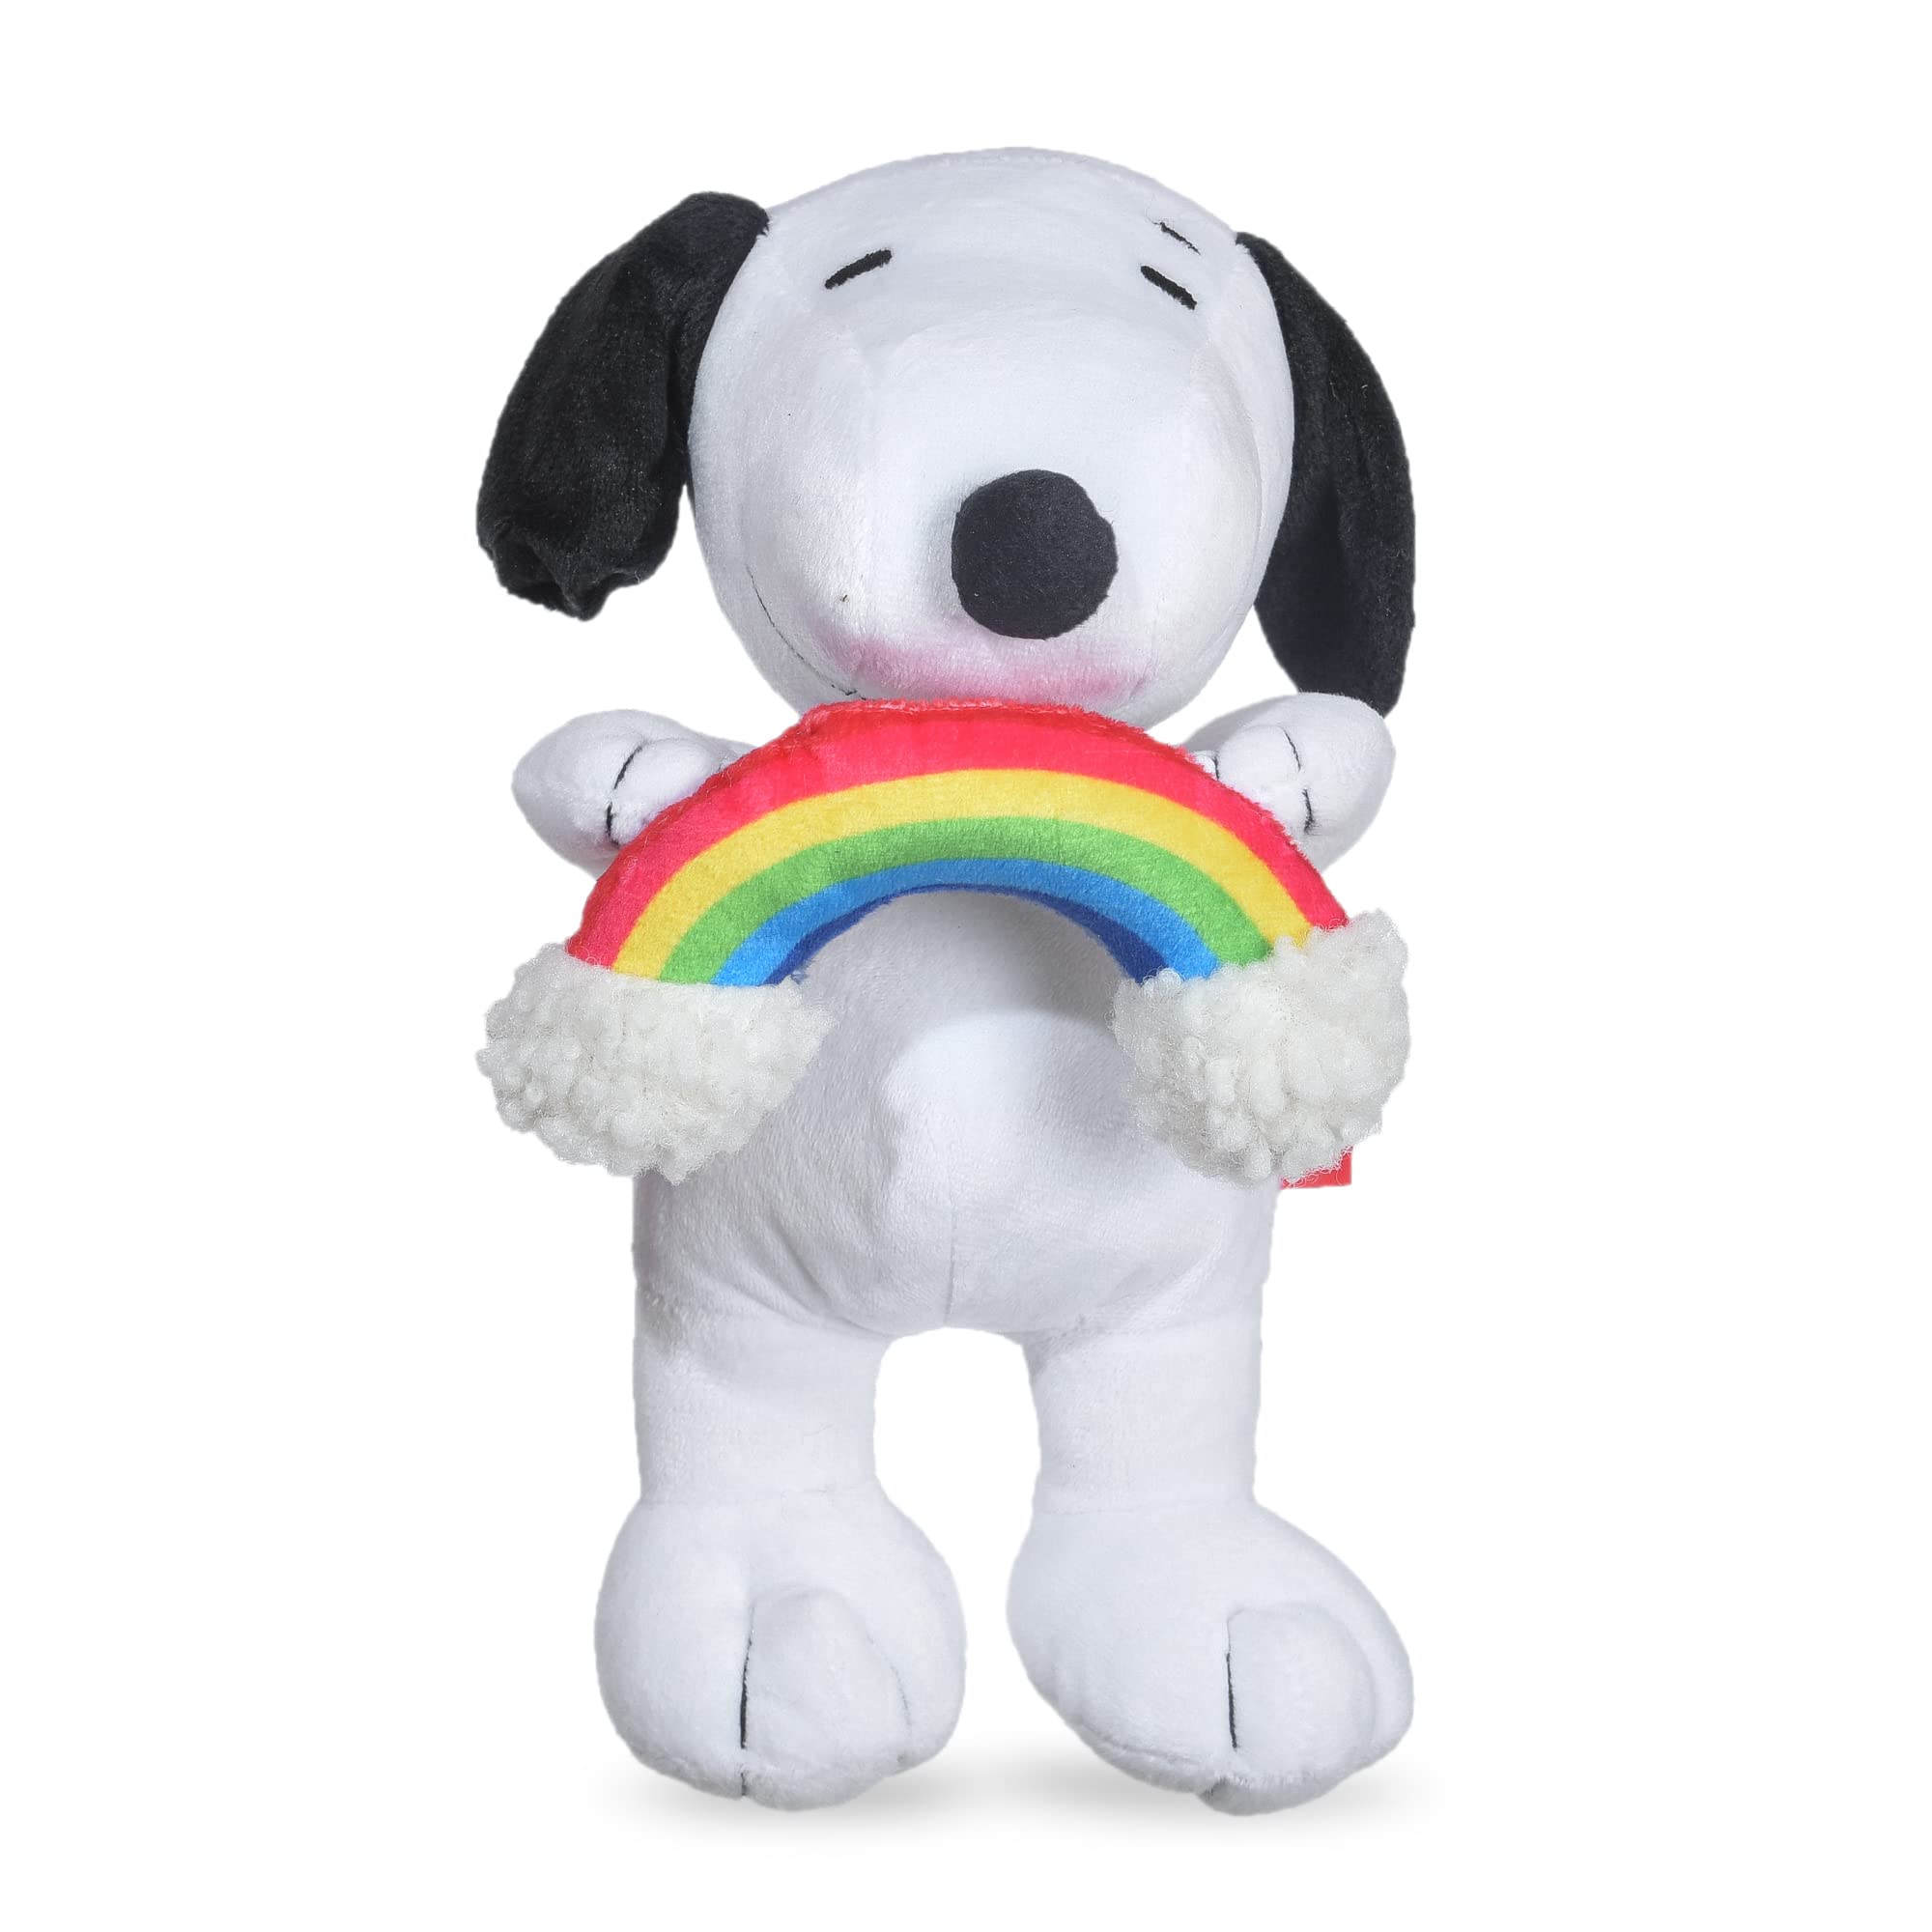 Peanuts for Pets Peanuts: Love 6” Snoopy Rainbow Squeaker Pet Toy 6" Snoopy Love Squeaky Pet Toy | Peanuts Dog Toys, Snoopy | Love Gifts for Pets, Snoopy Rainbow Toys for Dogs